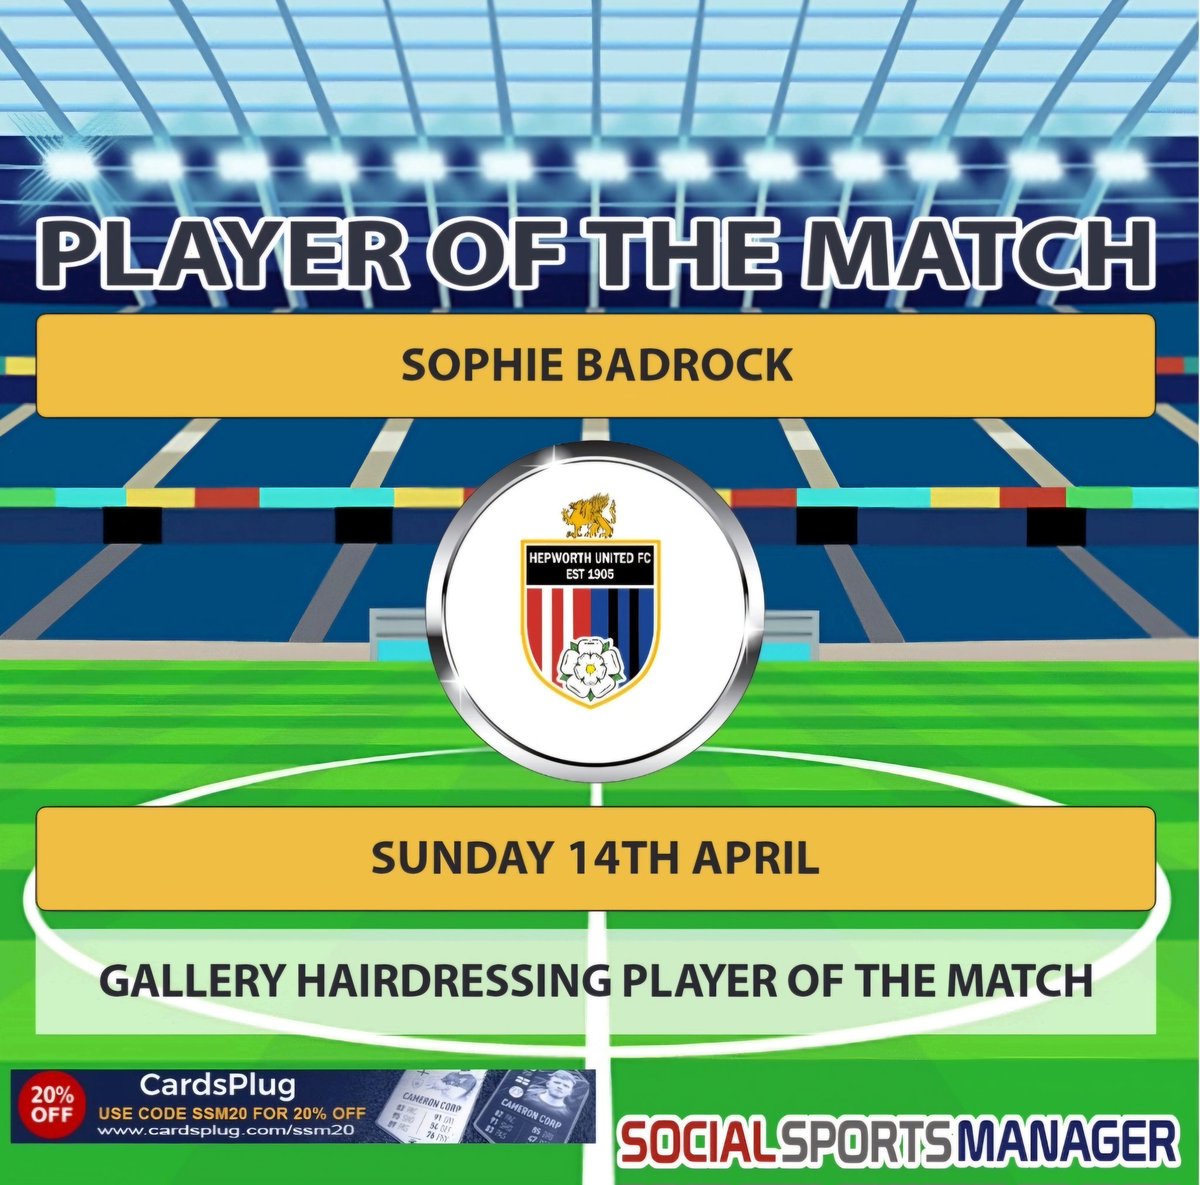 16yr old Sophie Badrock takes the Ladies Player of the Match Award today after a fantastic individual & Team effort v high flying Ilkley